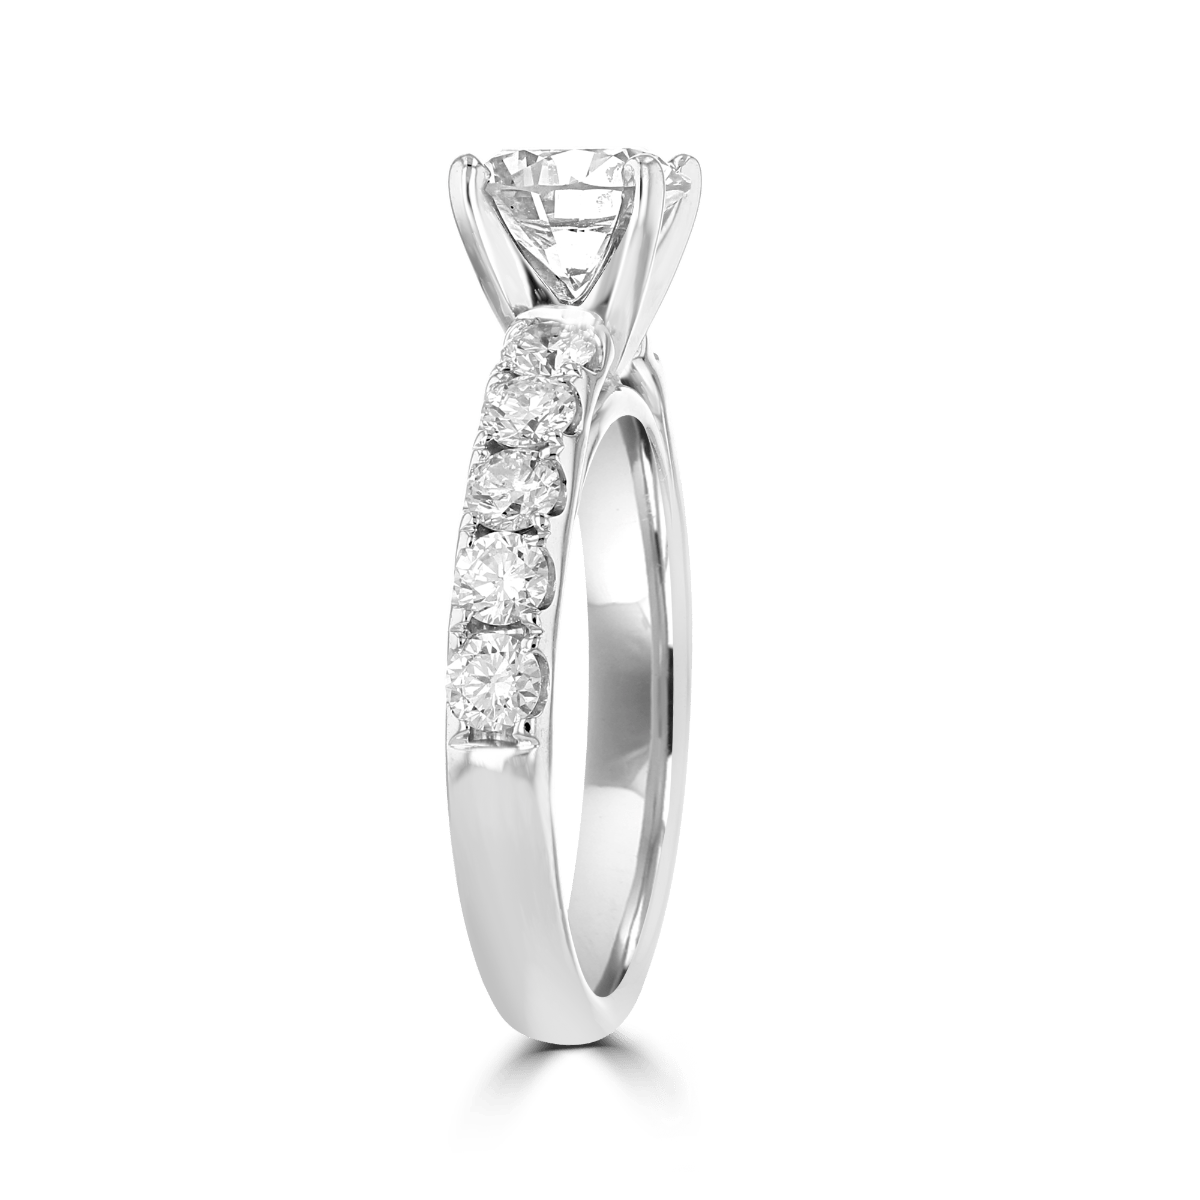 14KT 2 1/4 CTW Diamond Accent Ring With 1 1/2 CT Round Center Diamond I1 / 4,I1 / 4.5,I1 / 5,I1 / 5.5,I1 / 6,I1 / 6.5,I1 / 7,I1 / 7.5,I1 / 8,I1 / 8.5,I1 / 9,SI / 4,SI / 4.5,SI / 5,SI / 5.5,SI / 6,SI / 6.5,SI / 7,SI / 7.5,SI / 8,SI / 8.5,SI / 9,VS / 4,VS / 4.5,VS / 5,VS / 5.5,VS / 6,VS / 6.5,VS / 7,VS / 7.5,VS / 8,VS / 8.5,VS / 9